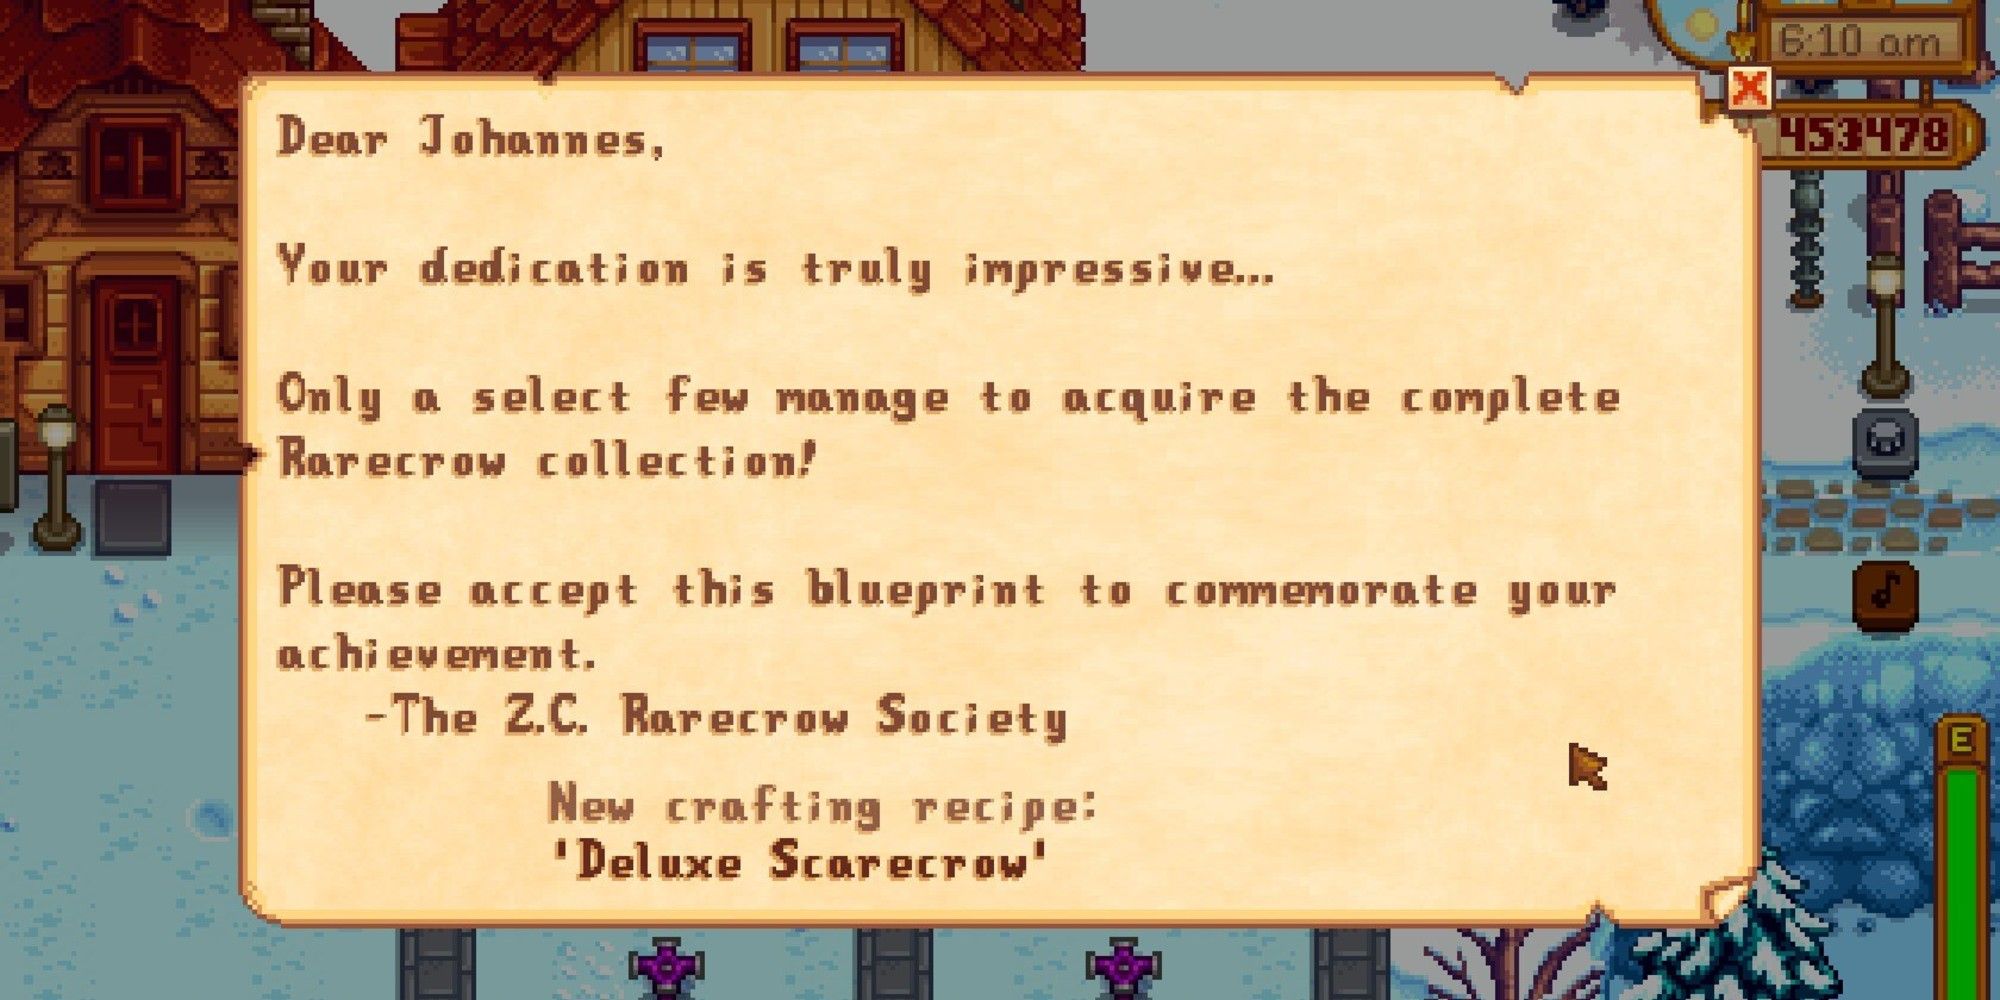 mail recieved after player finishes rarecrow collection, with deluxe scarecrow recipe